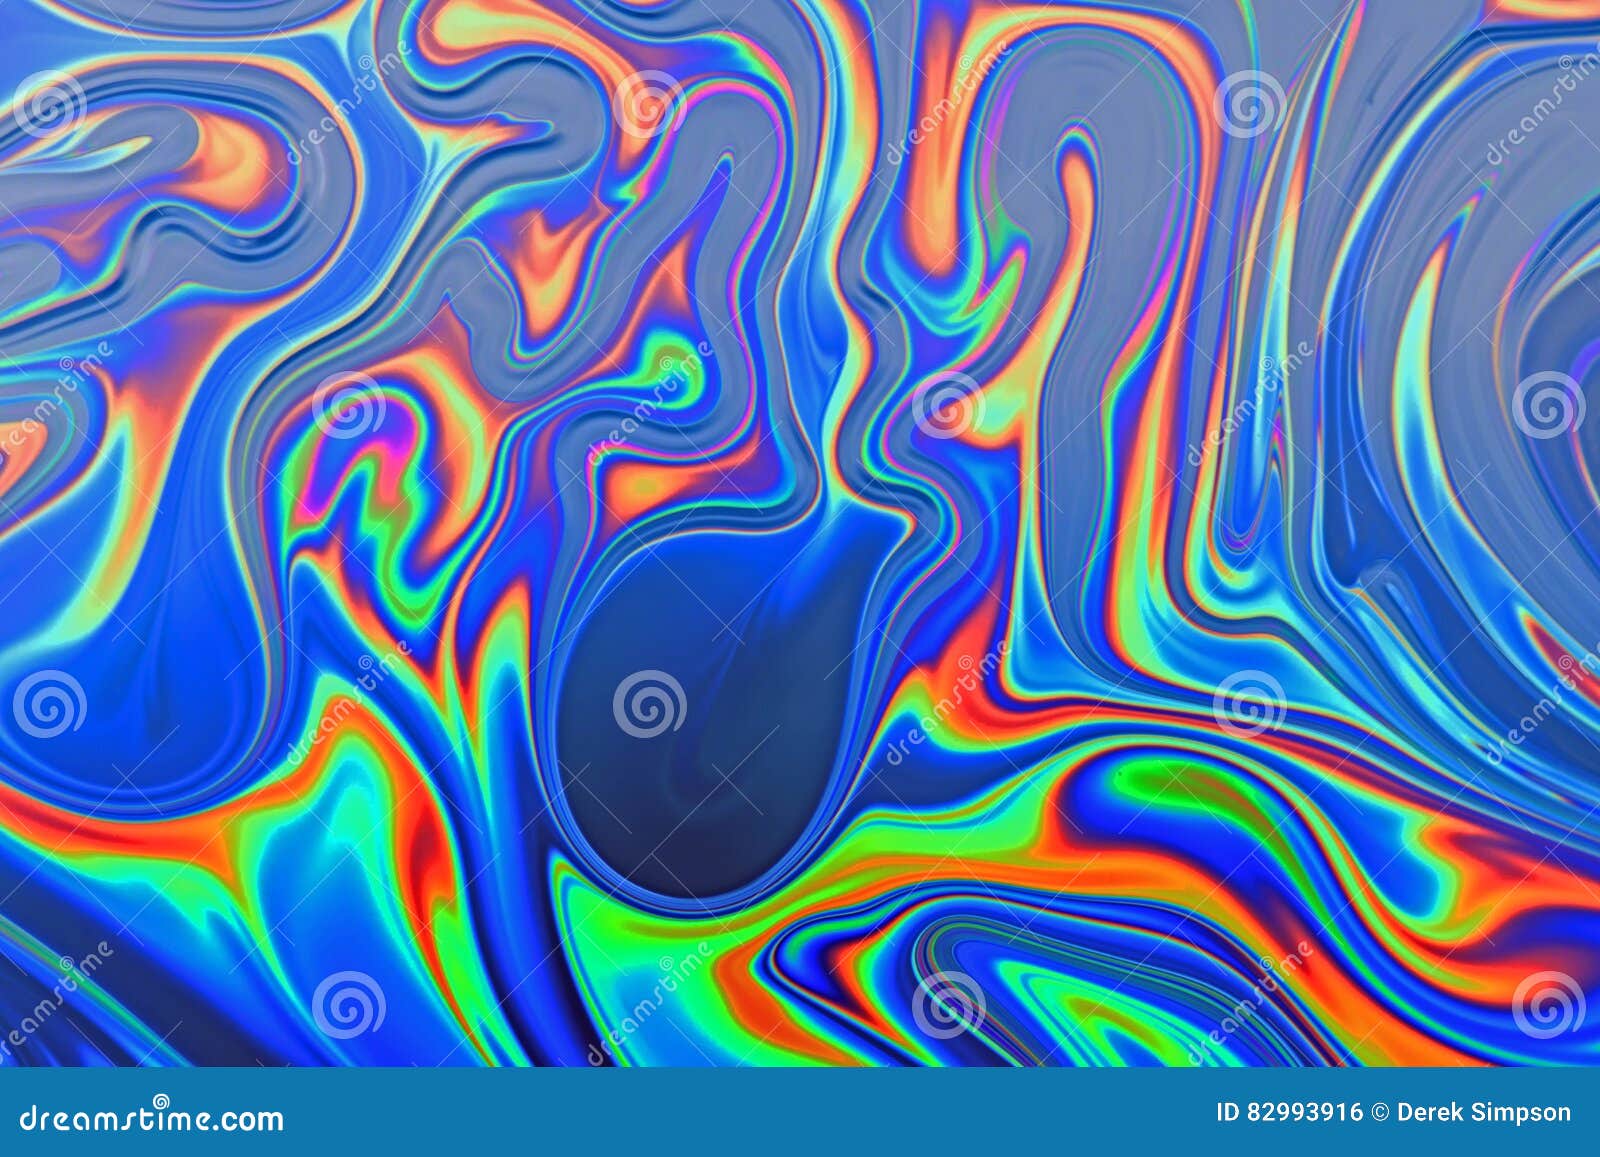 colorful psychedelic abstract